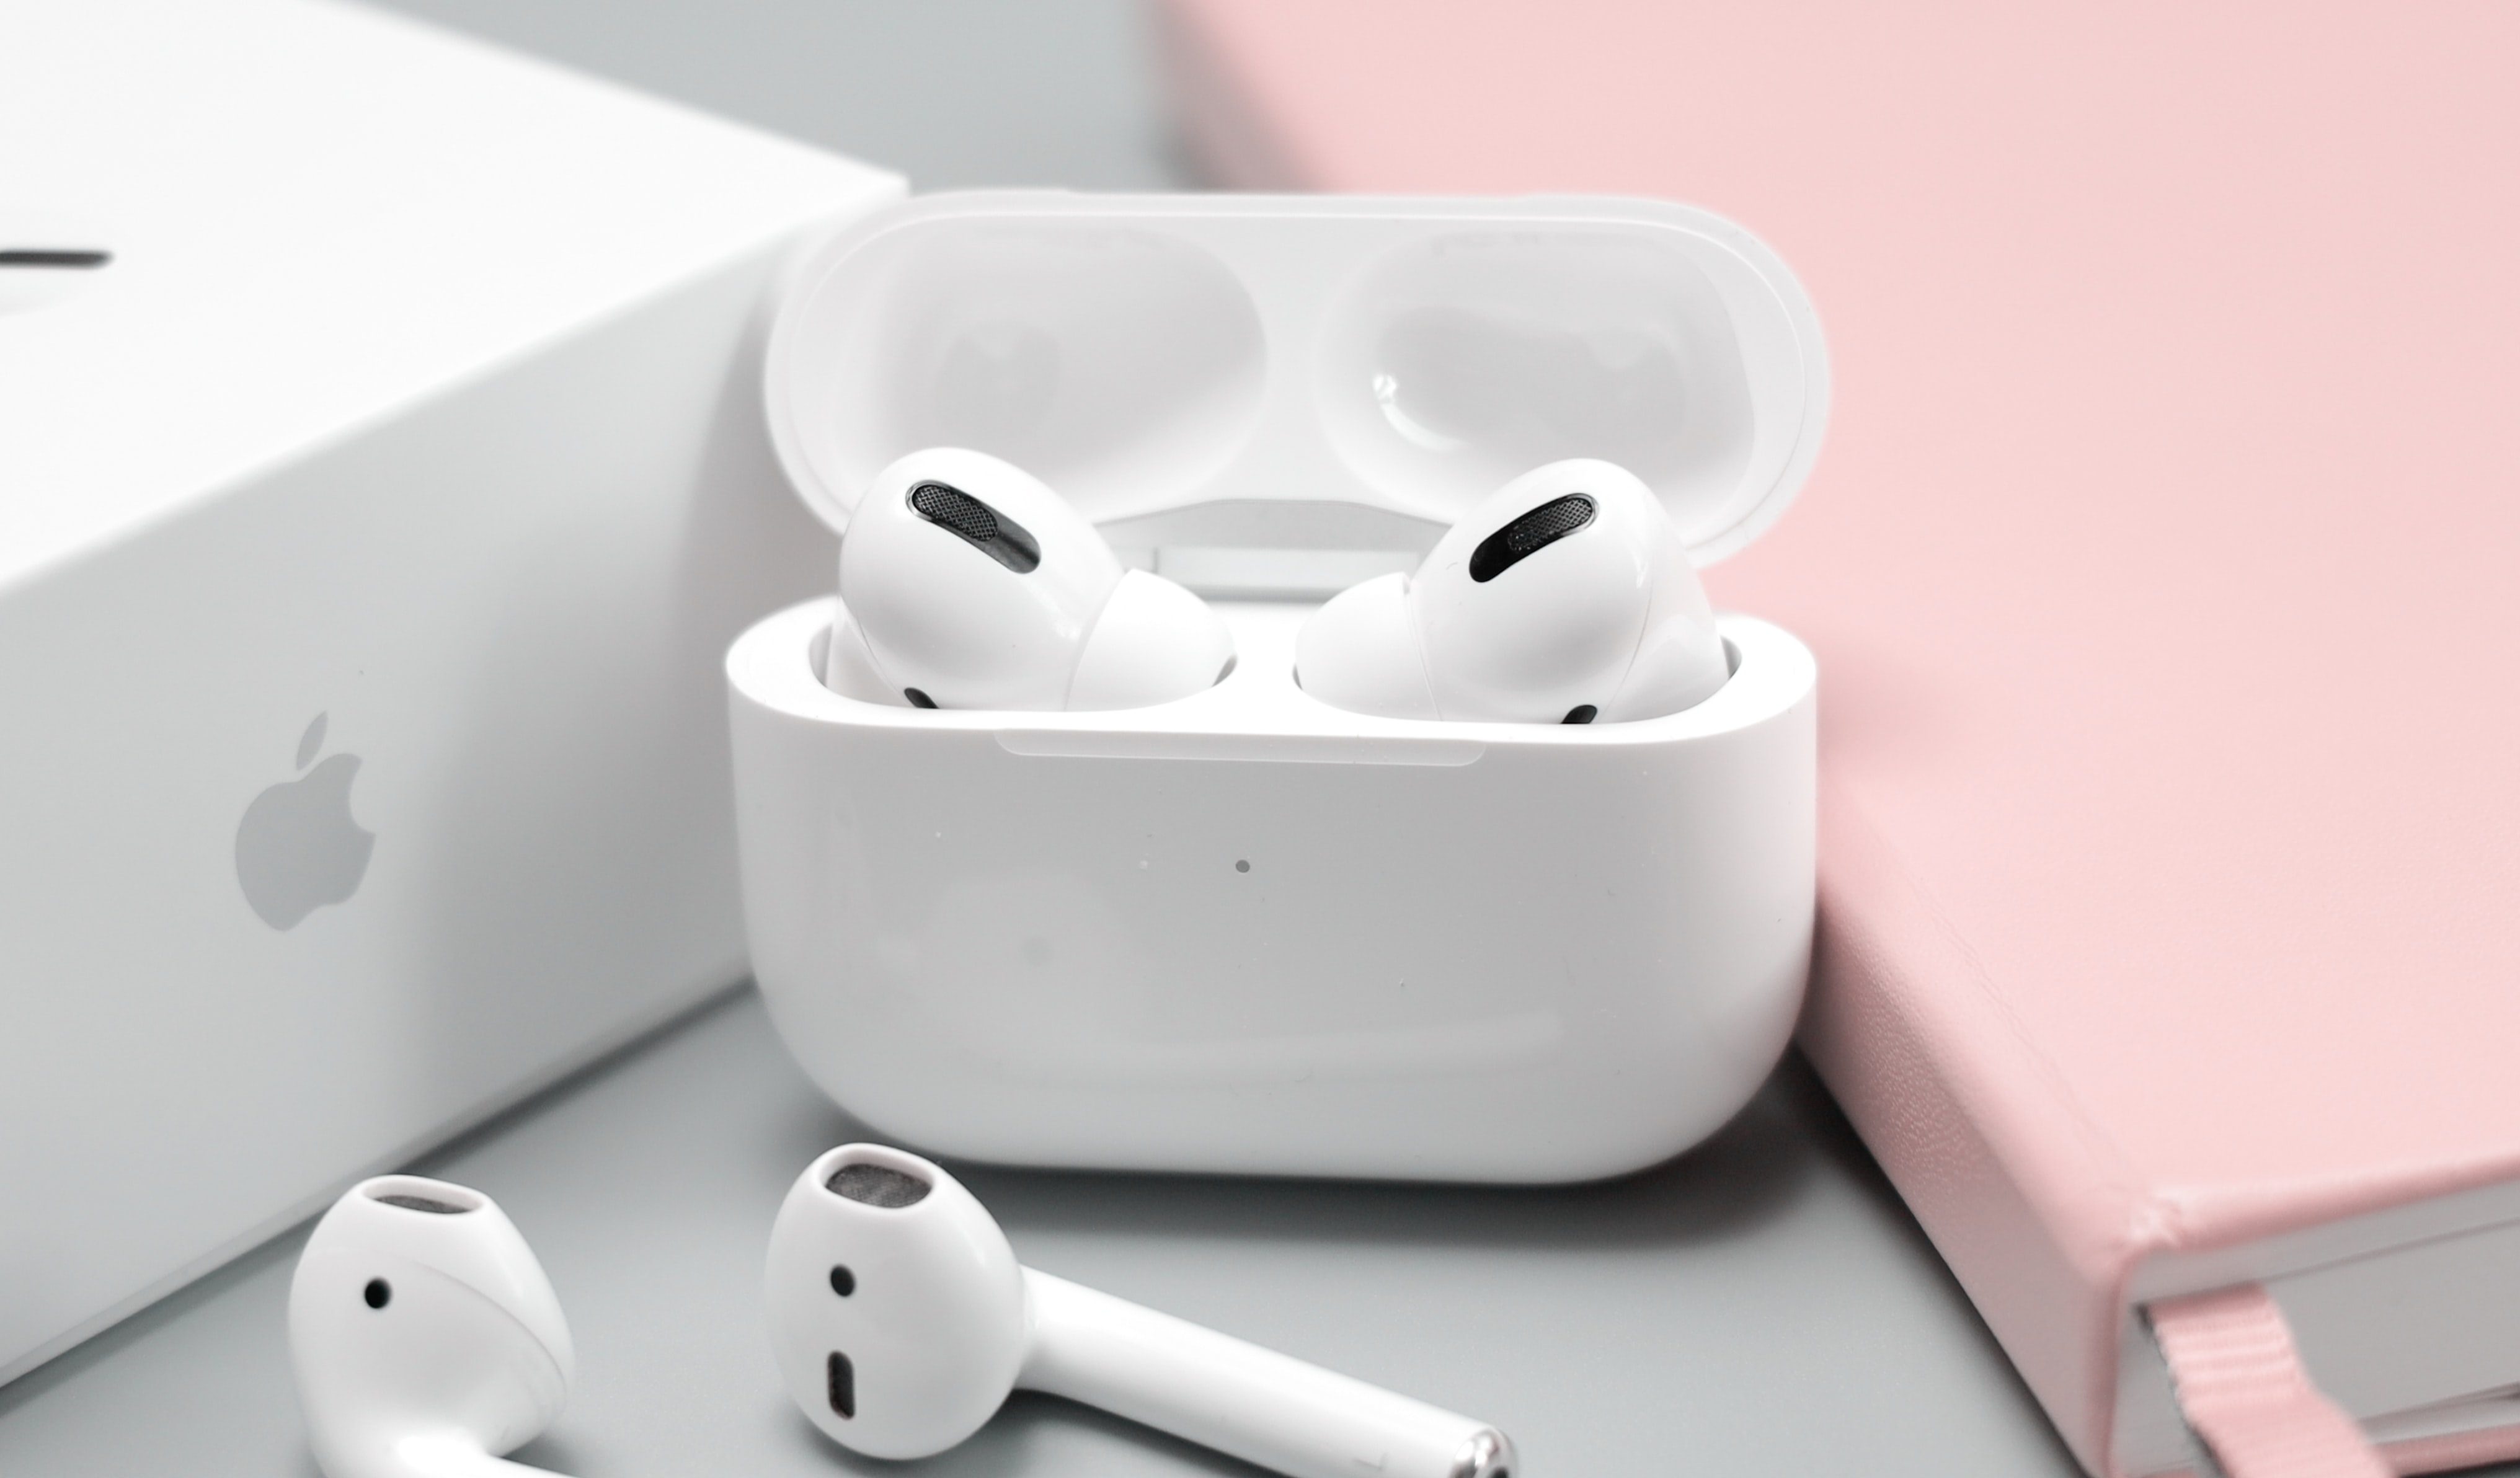 Apple Airpods up close shot with packaging in background